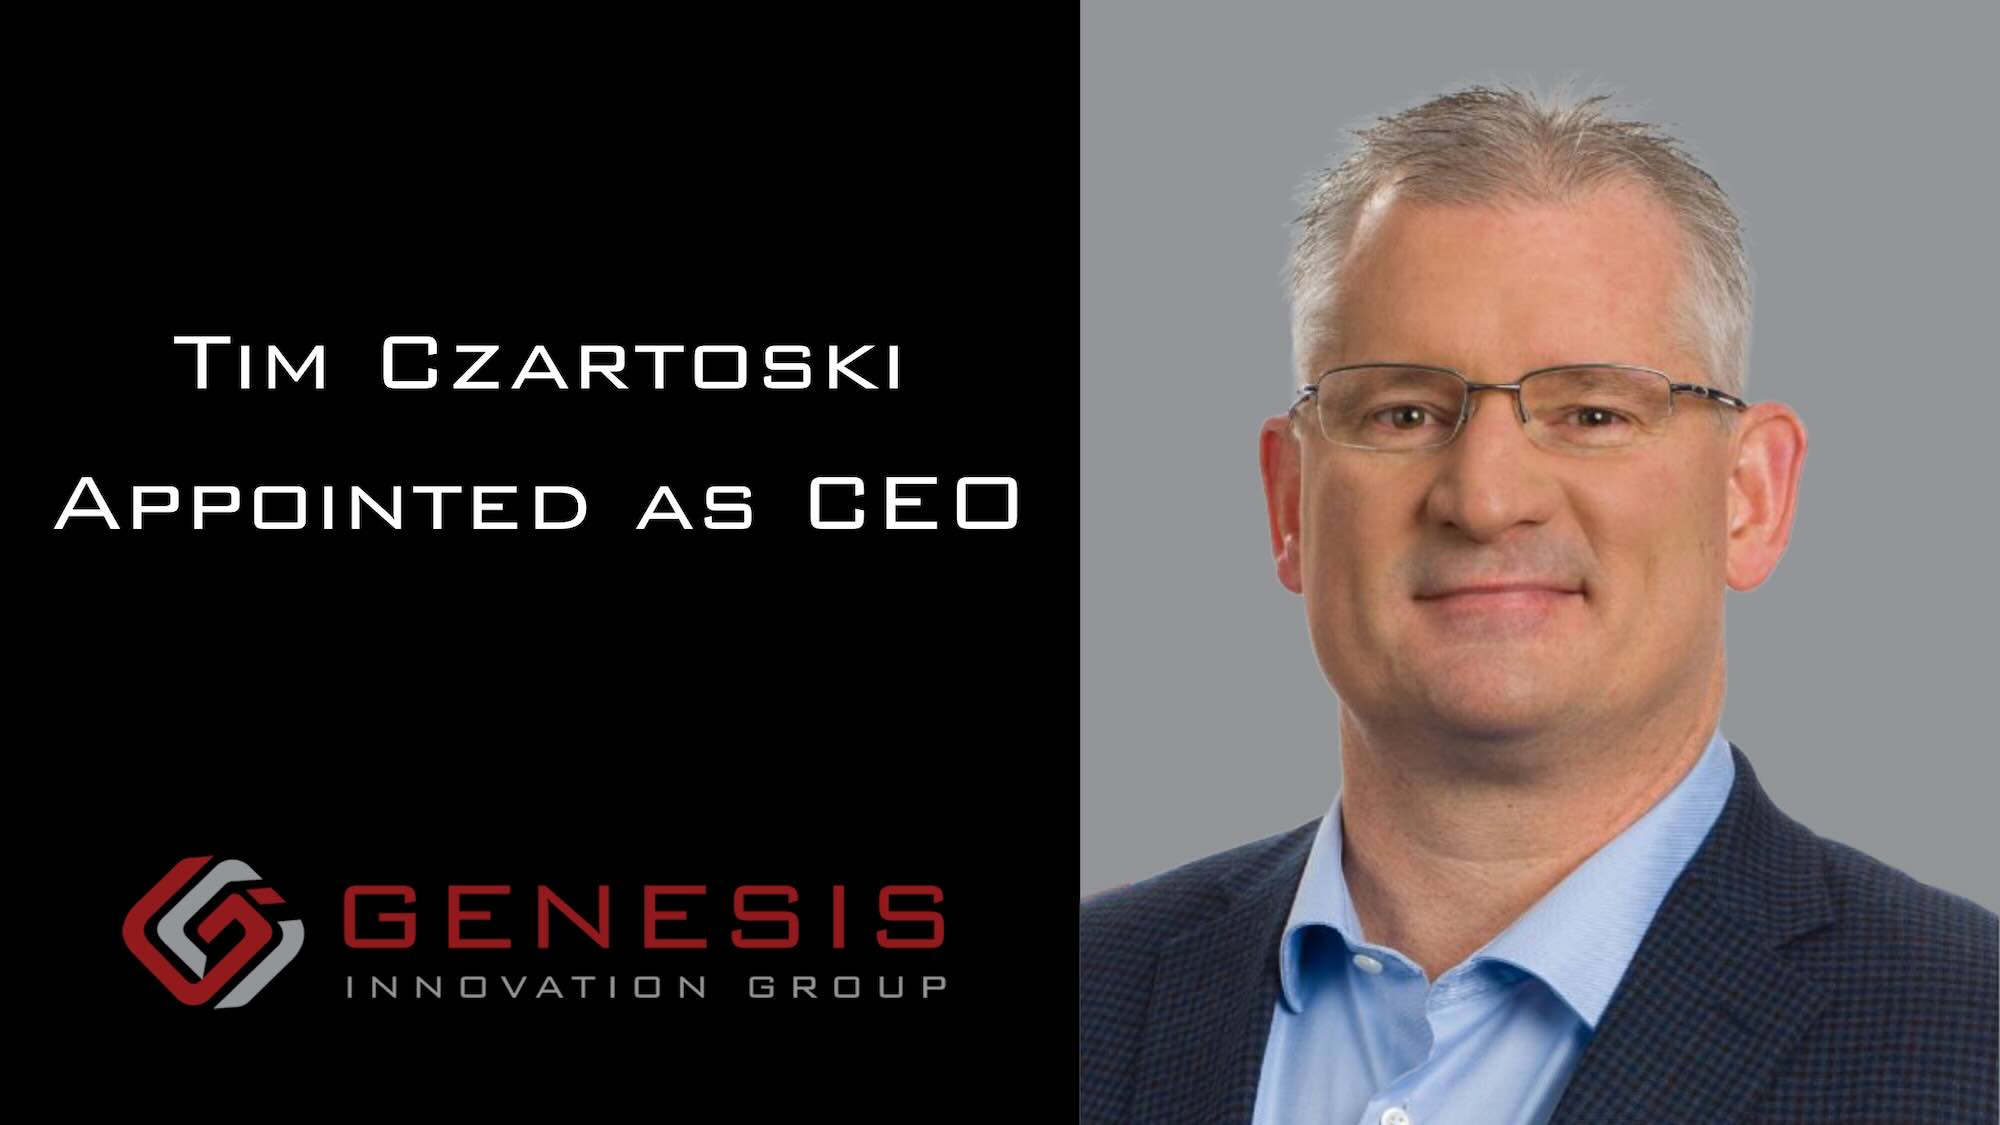 Tim Czartoski appointed as CEO for Genesis Innovation Group News Article